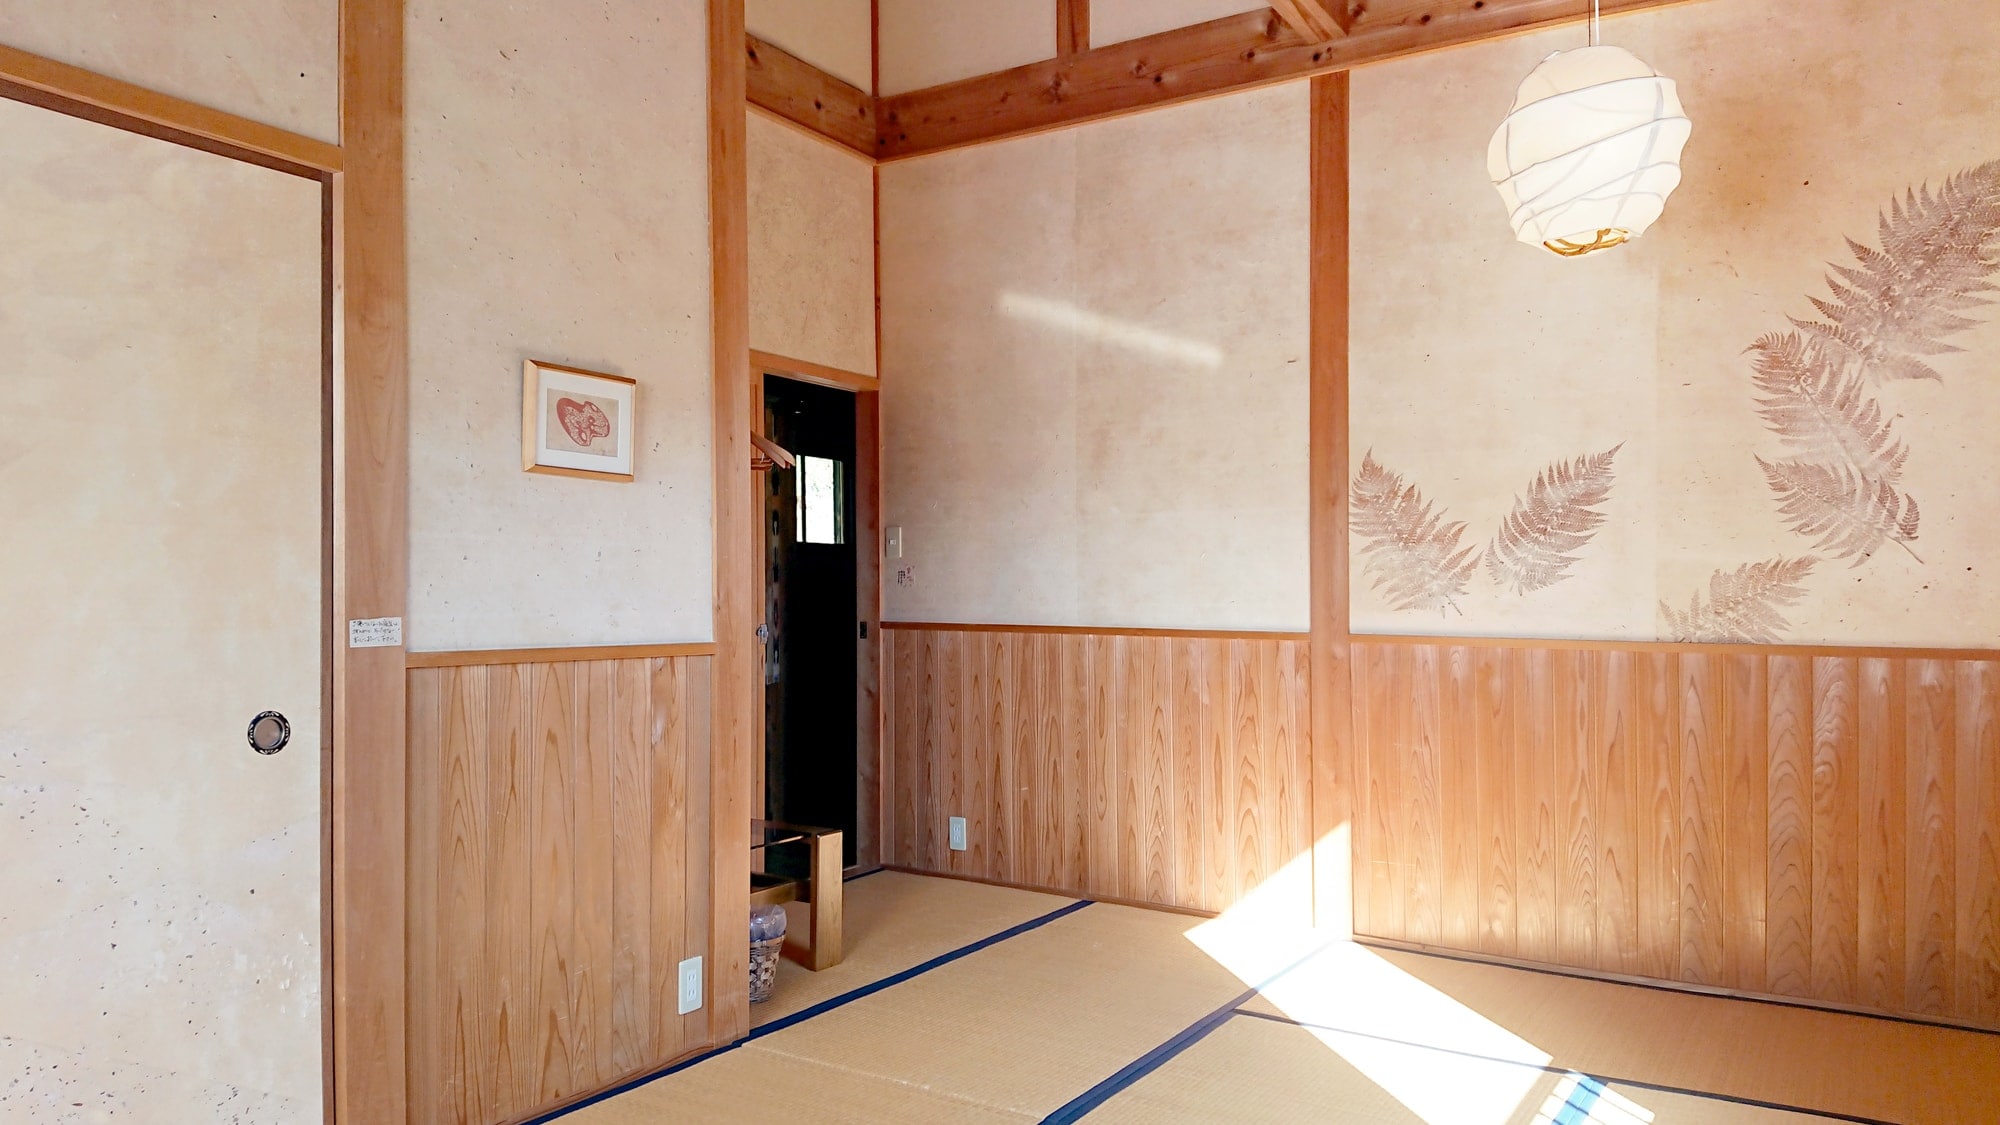 [Room] Japanese-style room with 8 tatami mats, please take a rest.